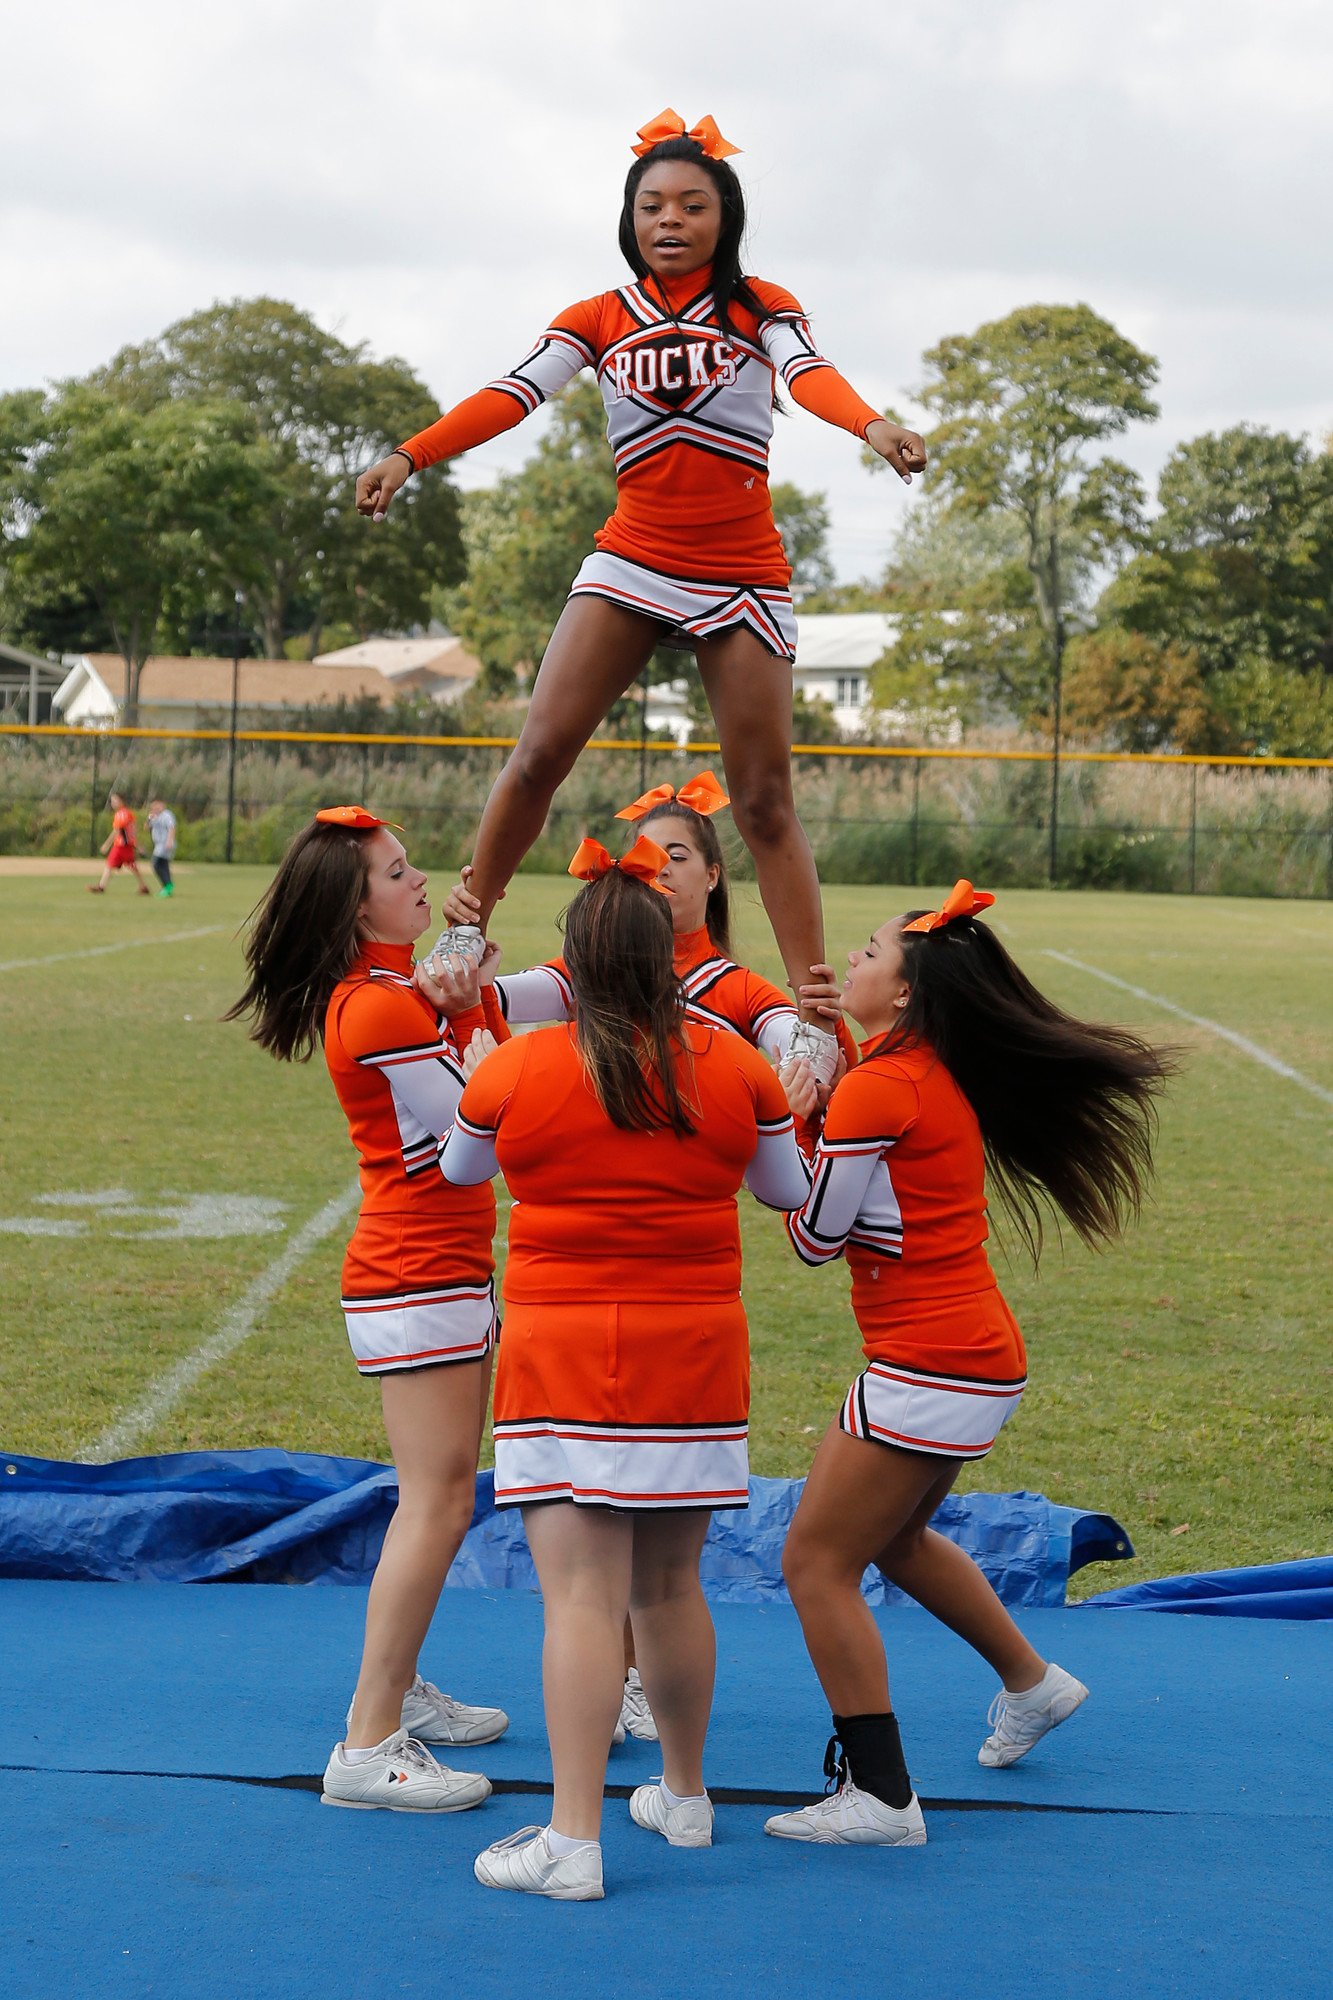 East Rockaway senior cheerleader and Captain Saskia Pilorqe and some of her squad perform during the game.